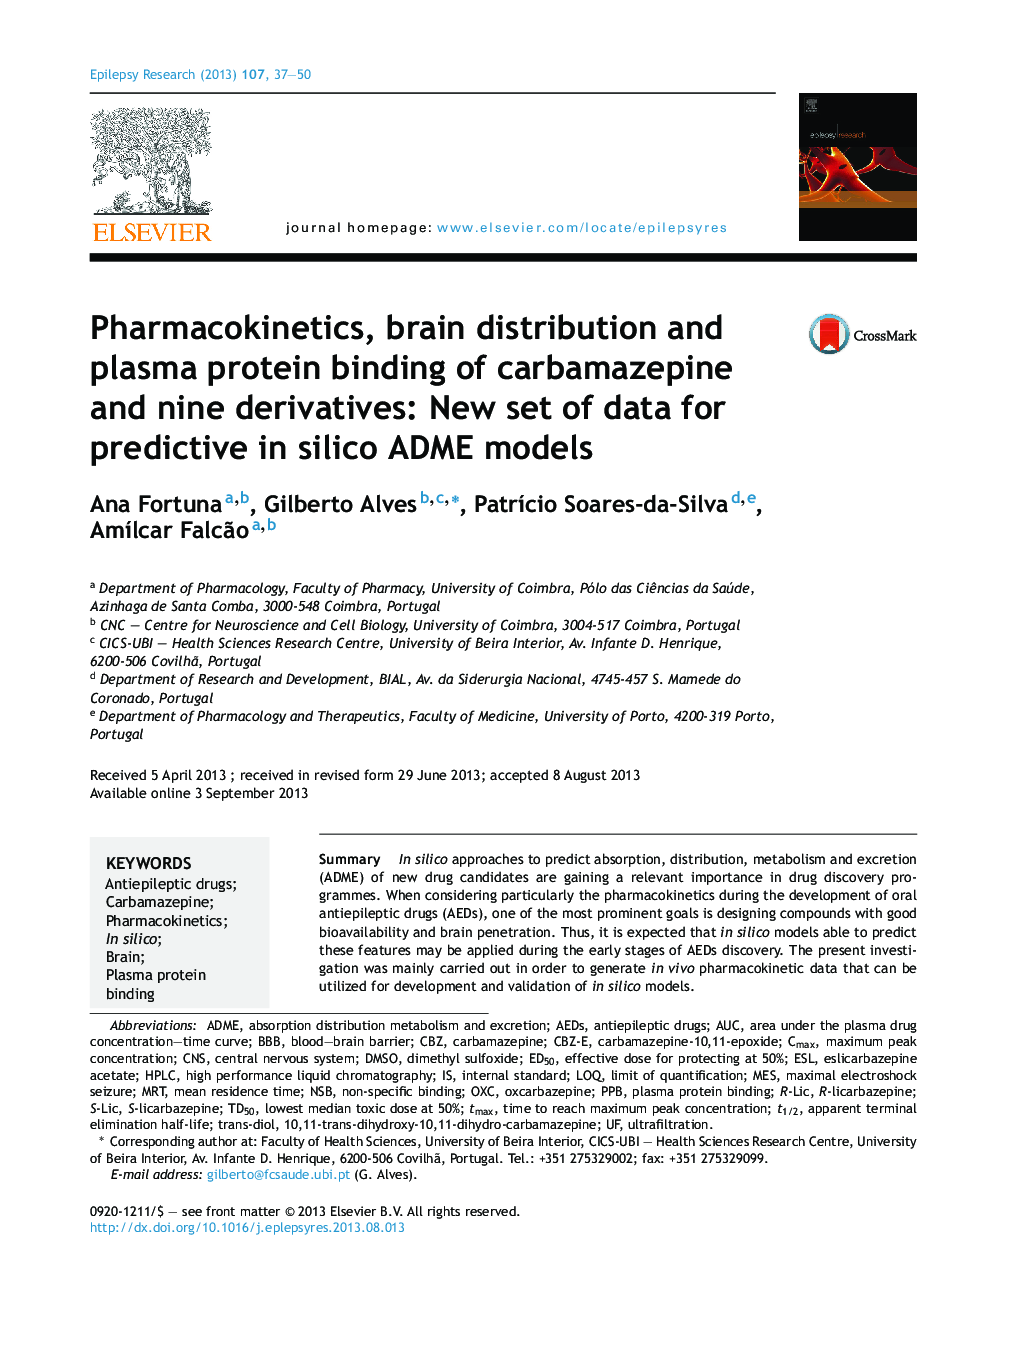 Pharmacokinetics, brain distribution and plasma protein binding of carbamazepine and nine derivatives: New set of data for predictive in silico ADME models